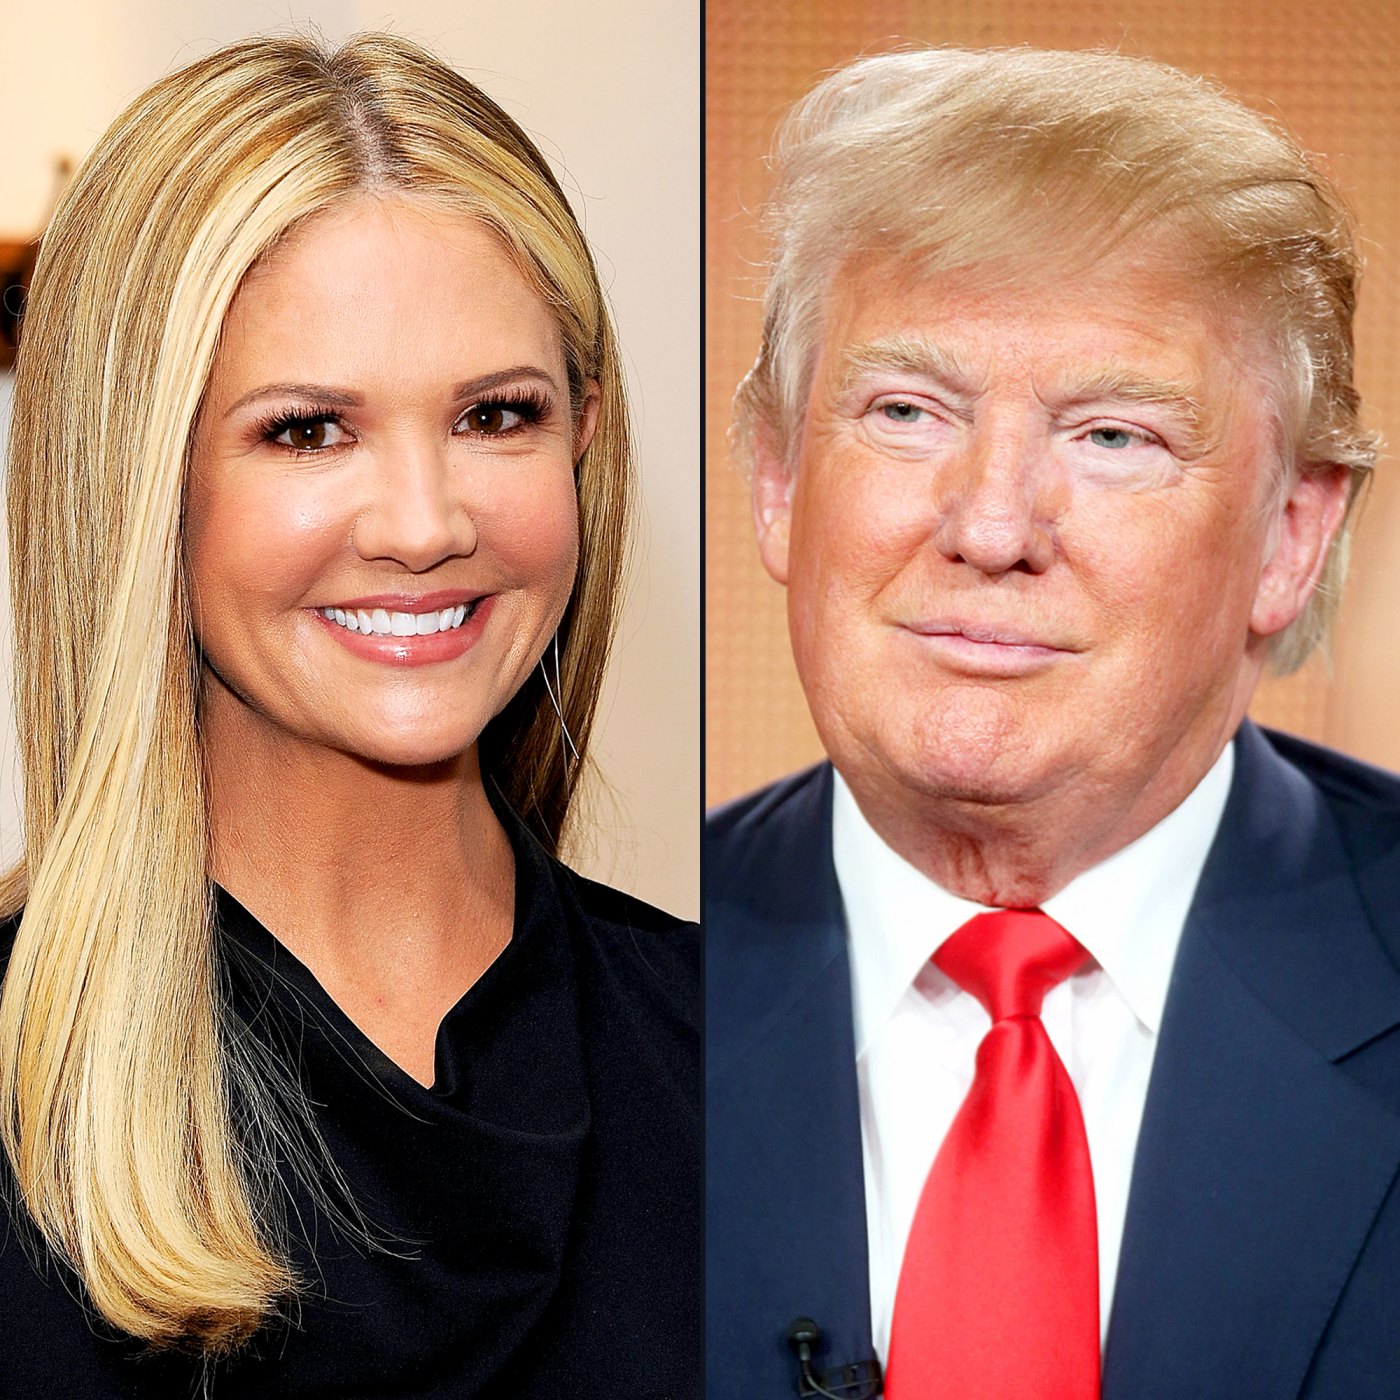 Nancy Odell Is The Married Woman Donald Trump Bragged About Hitting On